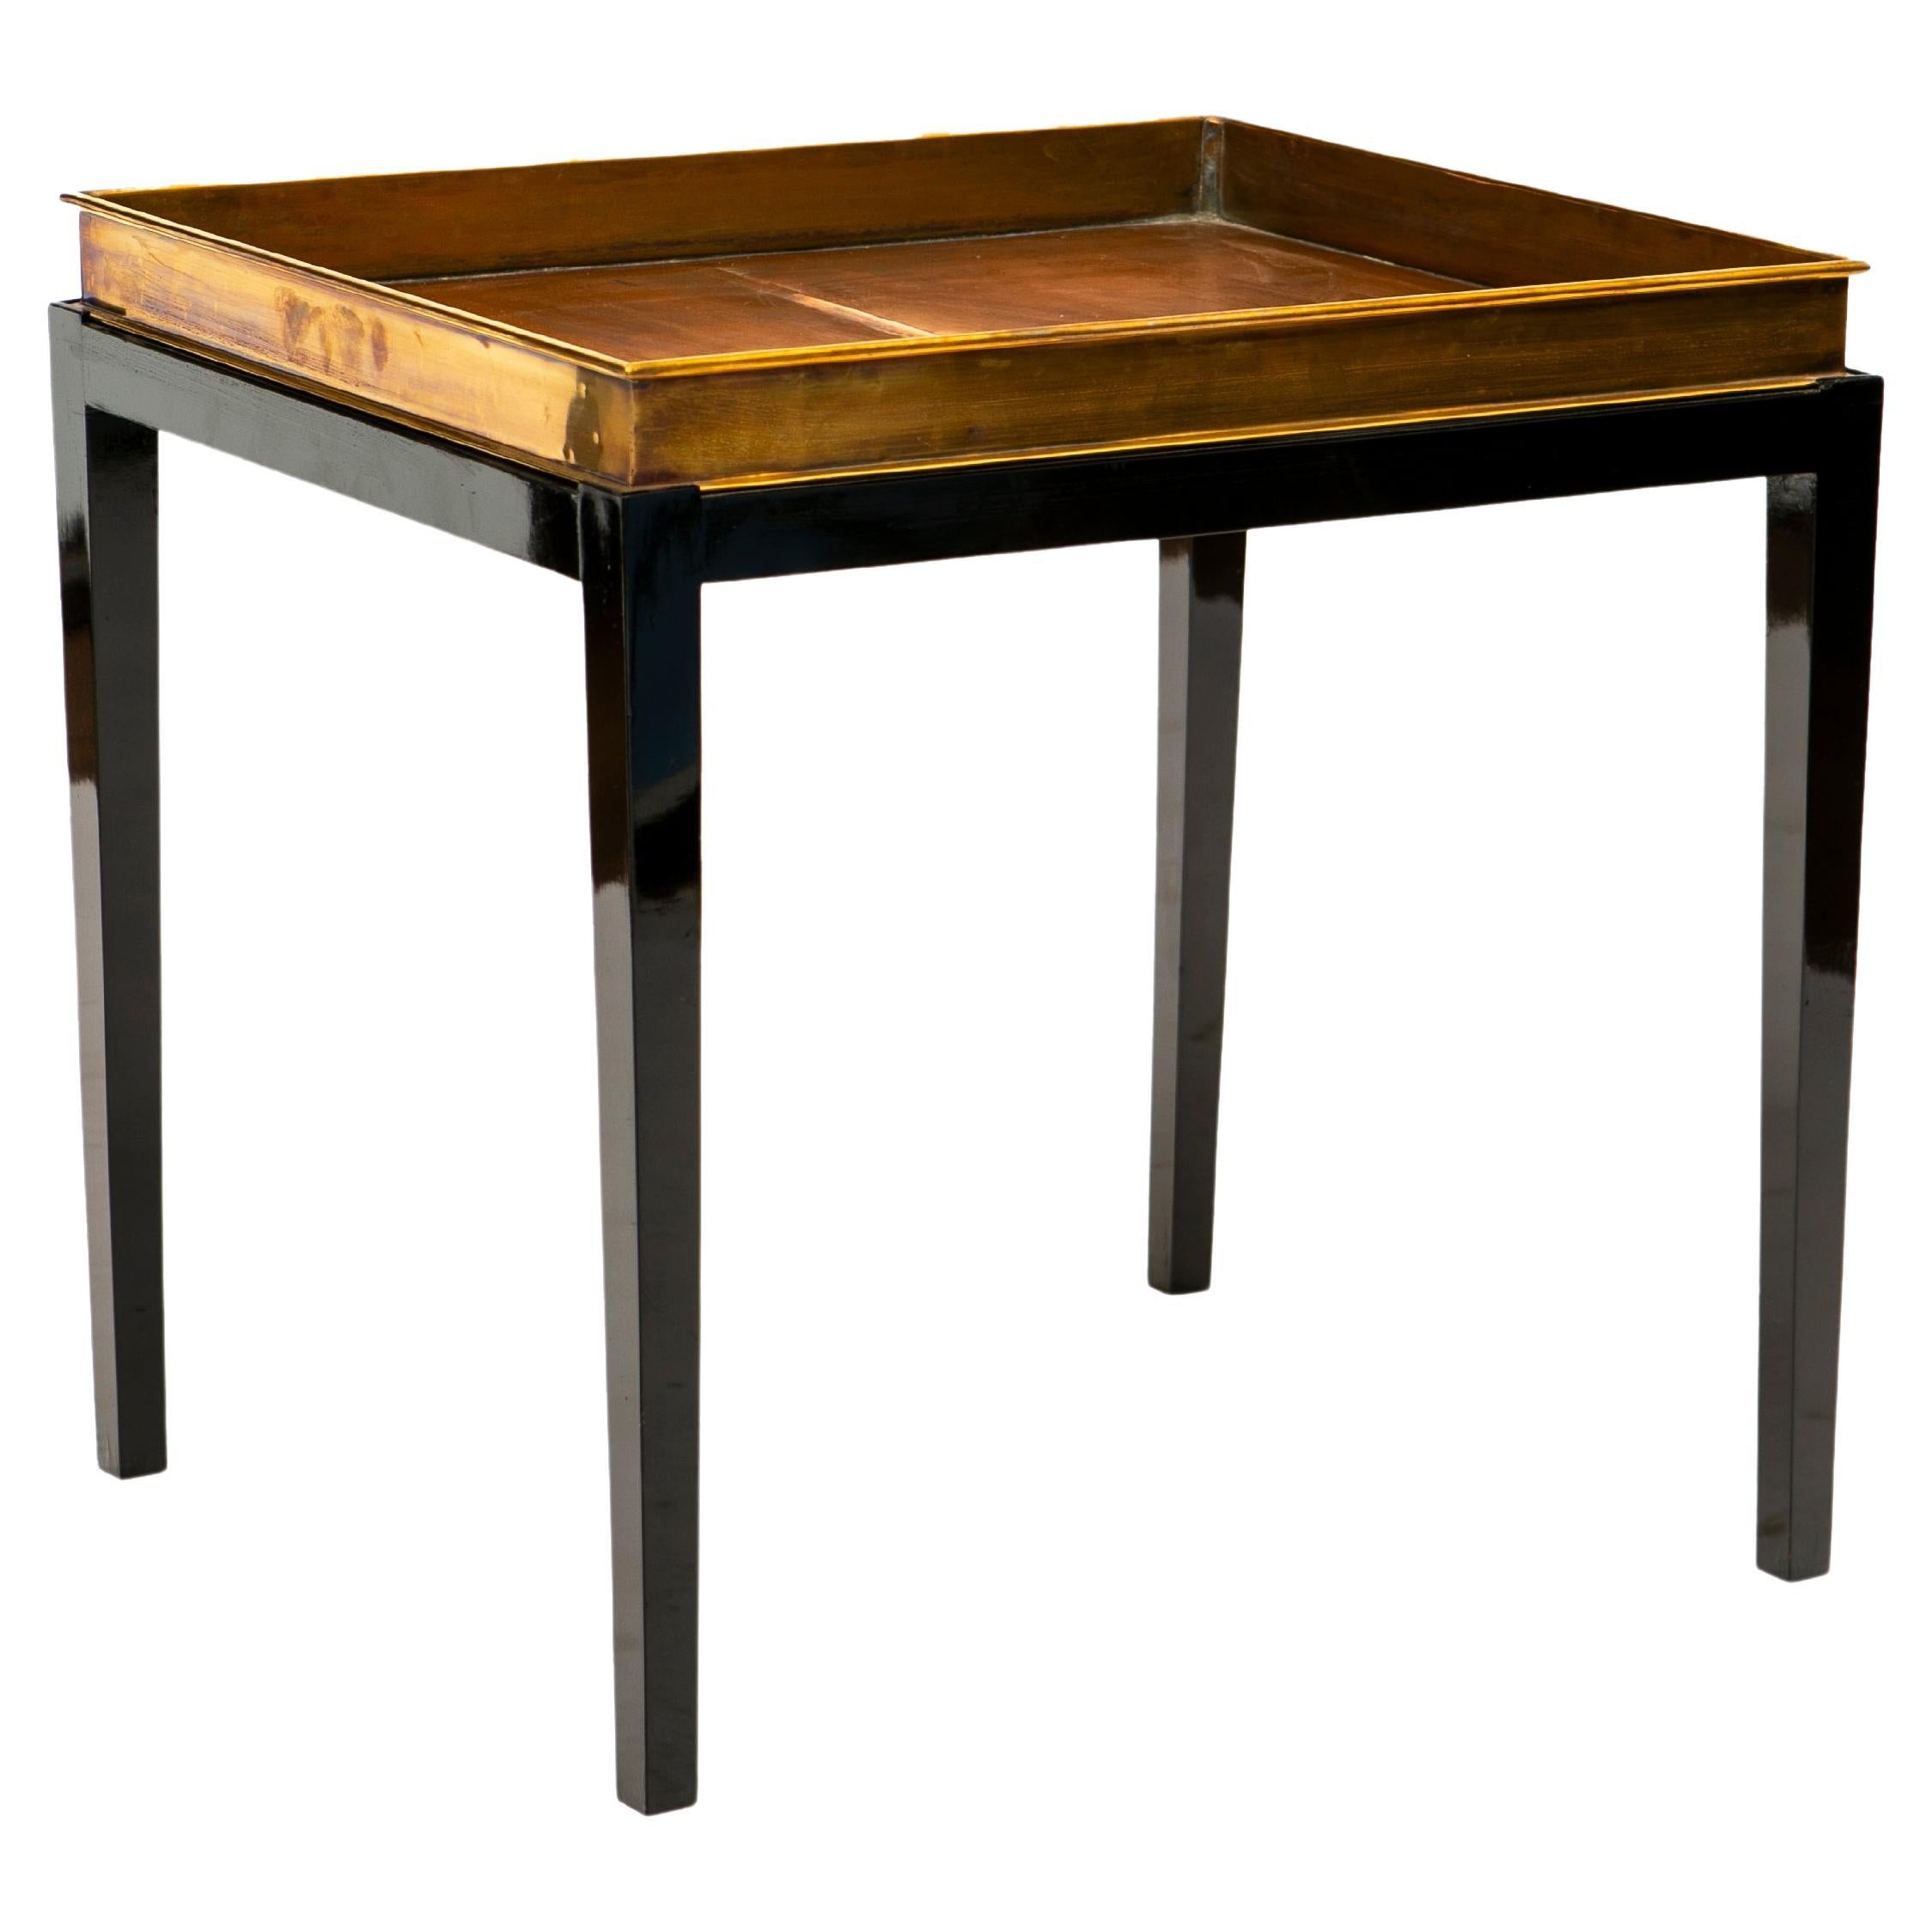 Tray Table Brass / Copper Black Polished Base For Sale